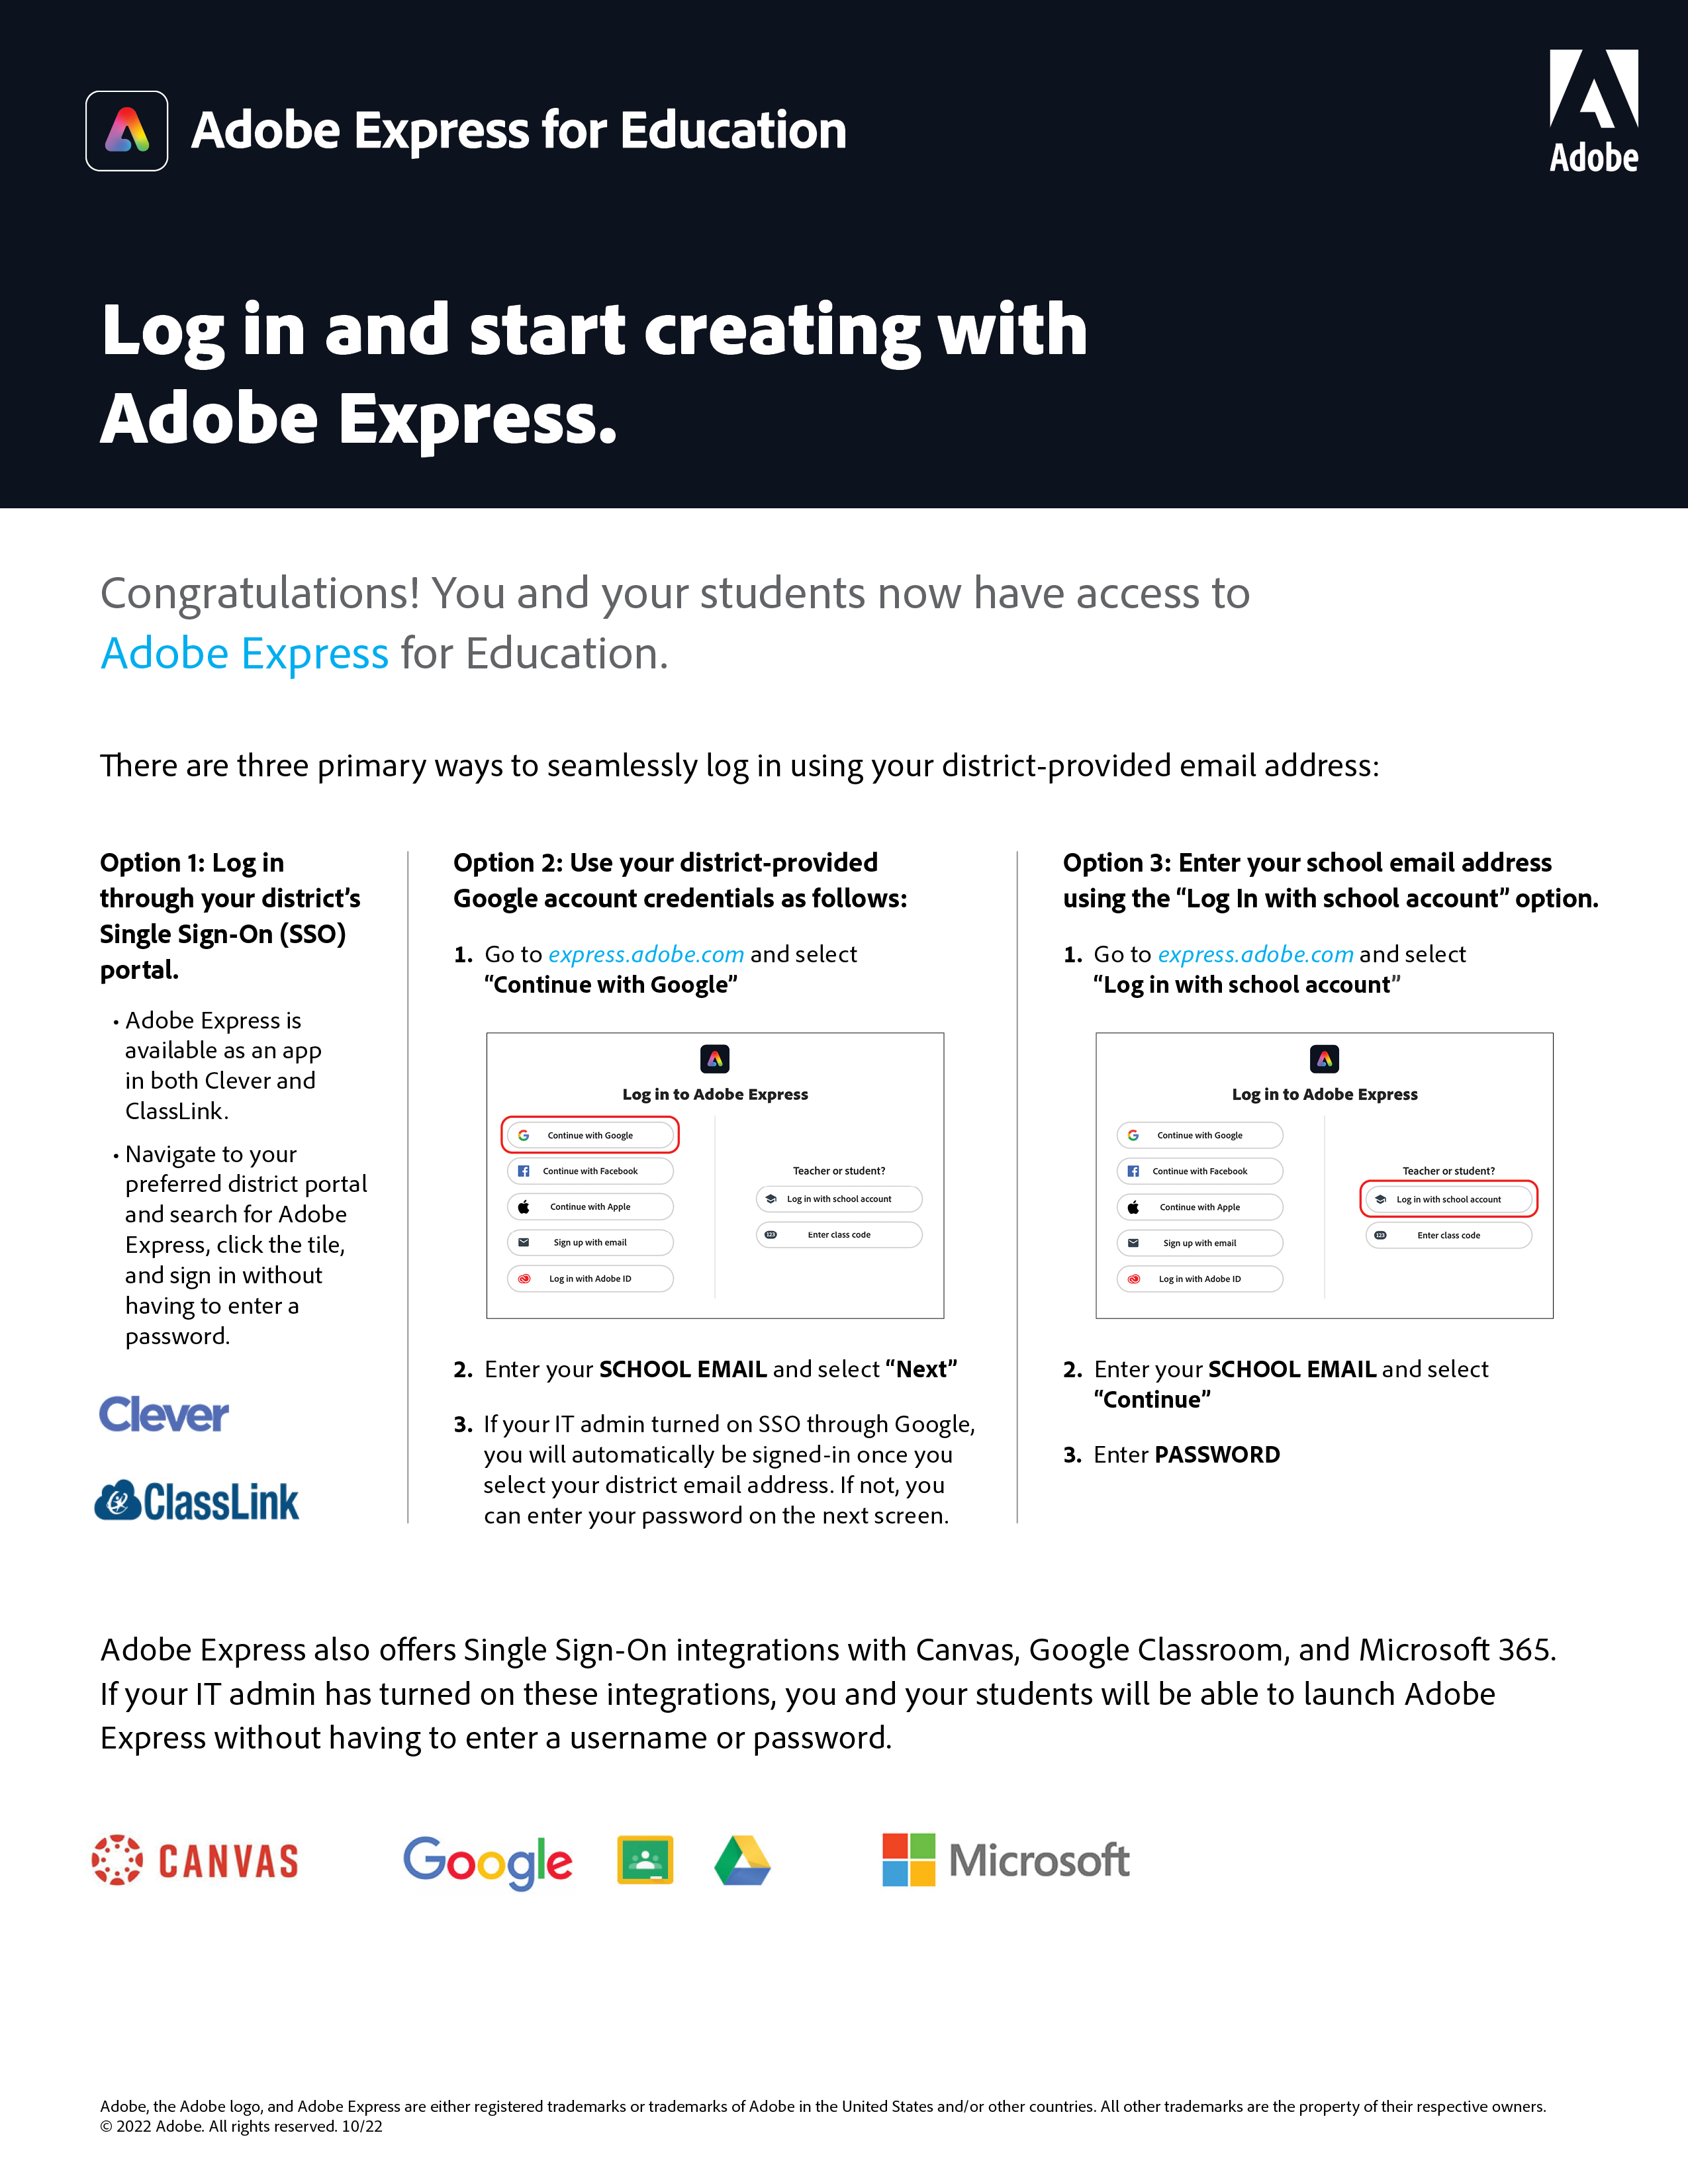 Log in to Adobe Express with Federated/Enterprise ID, Google, or Microsoft 365